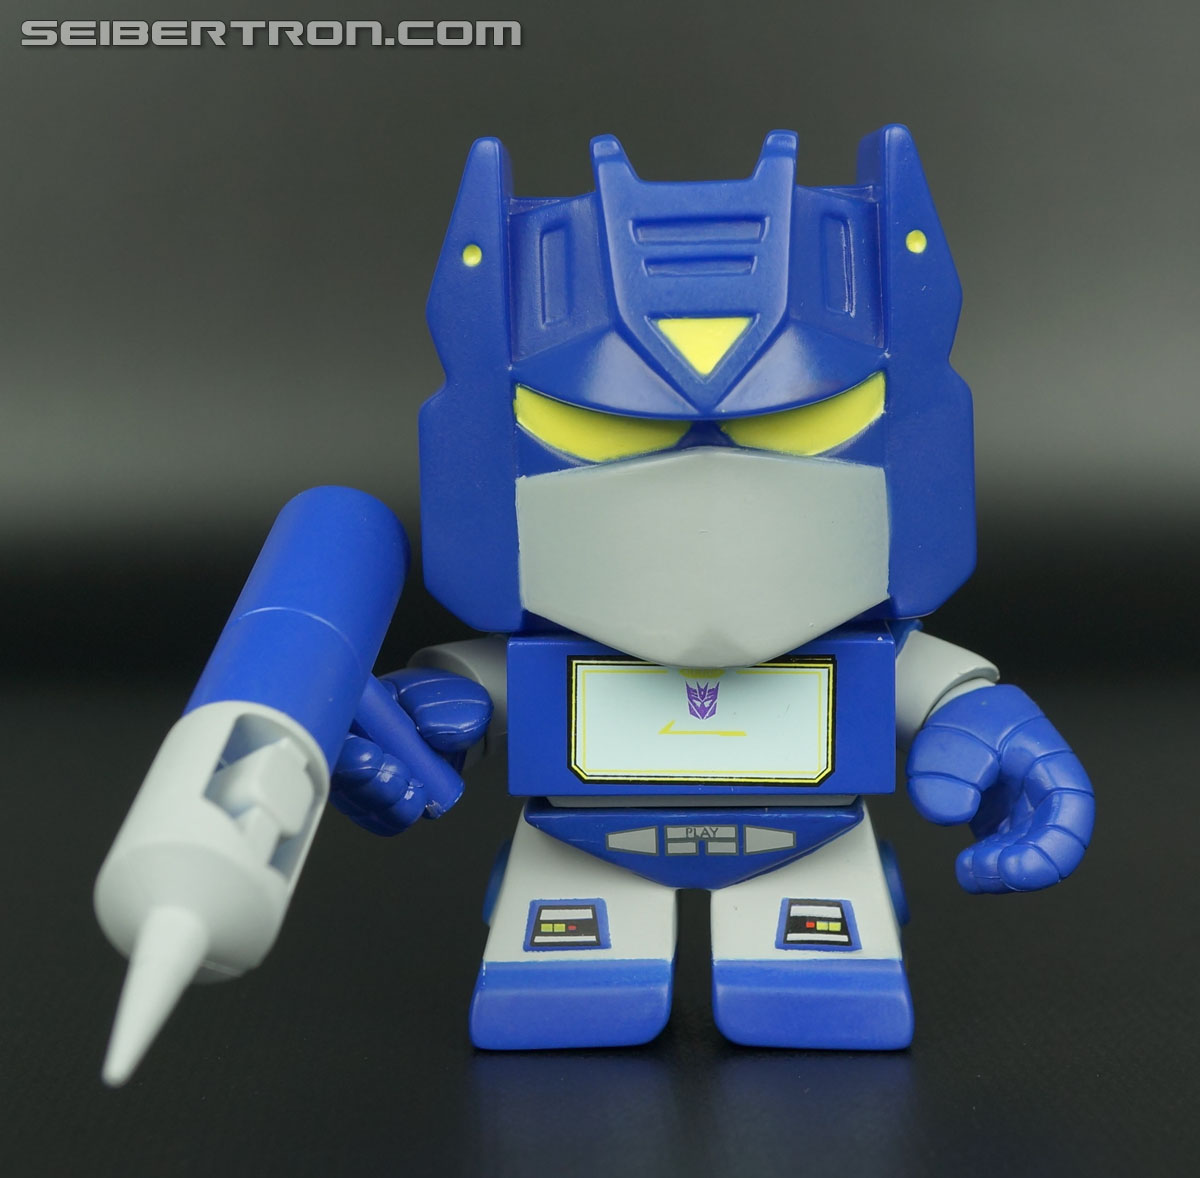 Transformers Loyal Subjects Soundwave (Image #5 of 32)